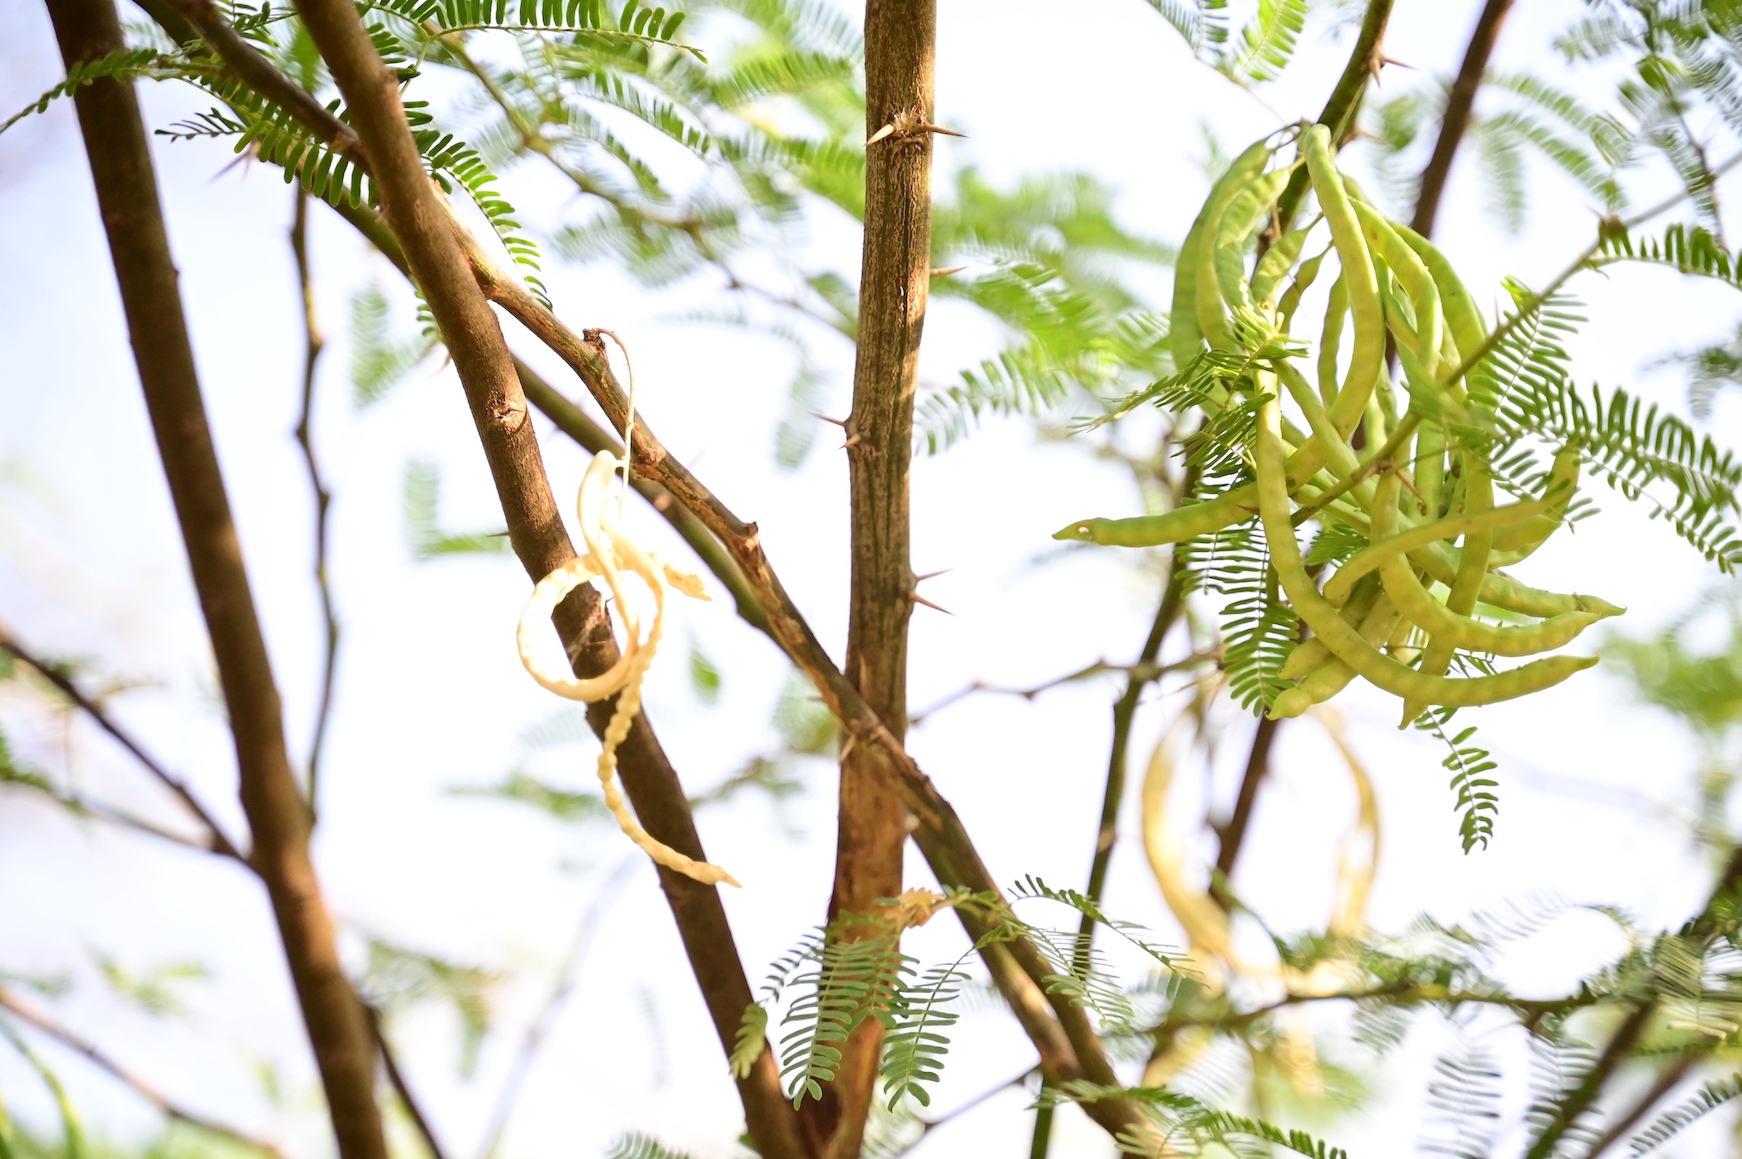 Prosopis juliflora is an invasive plant that has covered almost 70% of Baringo South. Although its thorns are poisonous, the pods are a good source of protein for animal feed. World Vision Photo/Hellen Owuor.